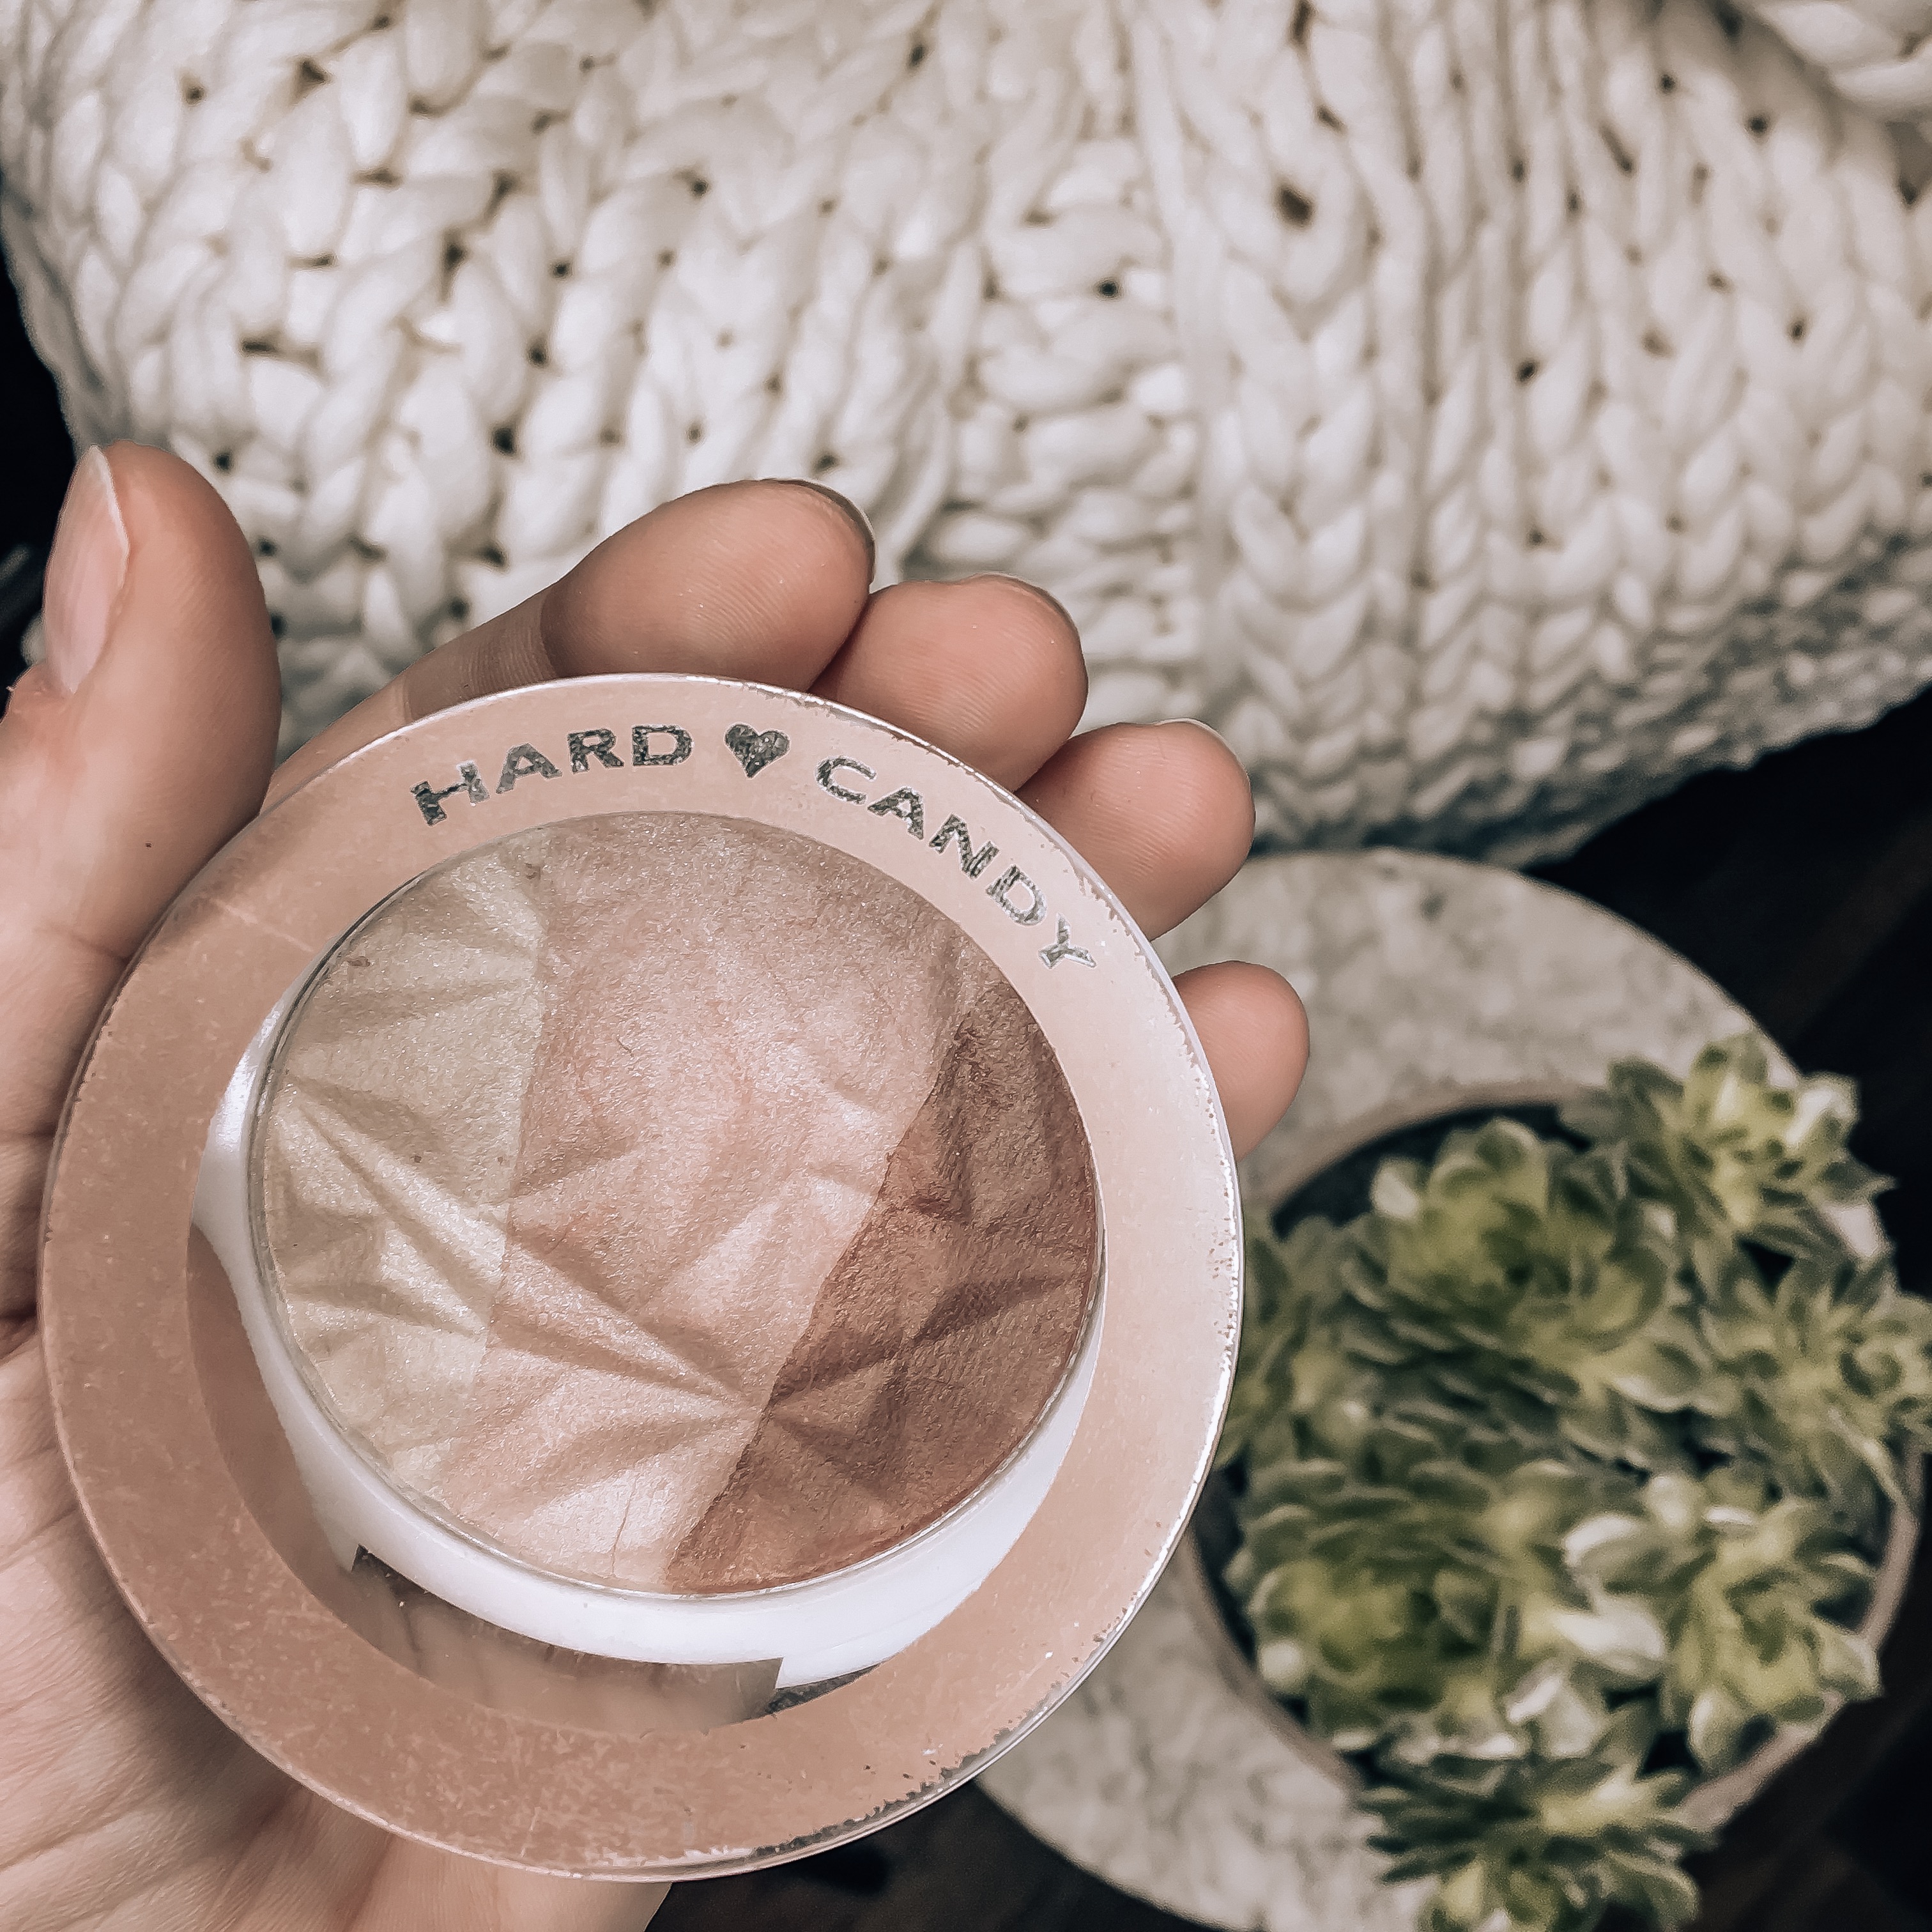 hard candy-highlighter-rose gold-beauty products-makeup-roundup-favorites-june